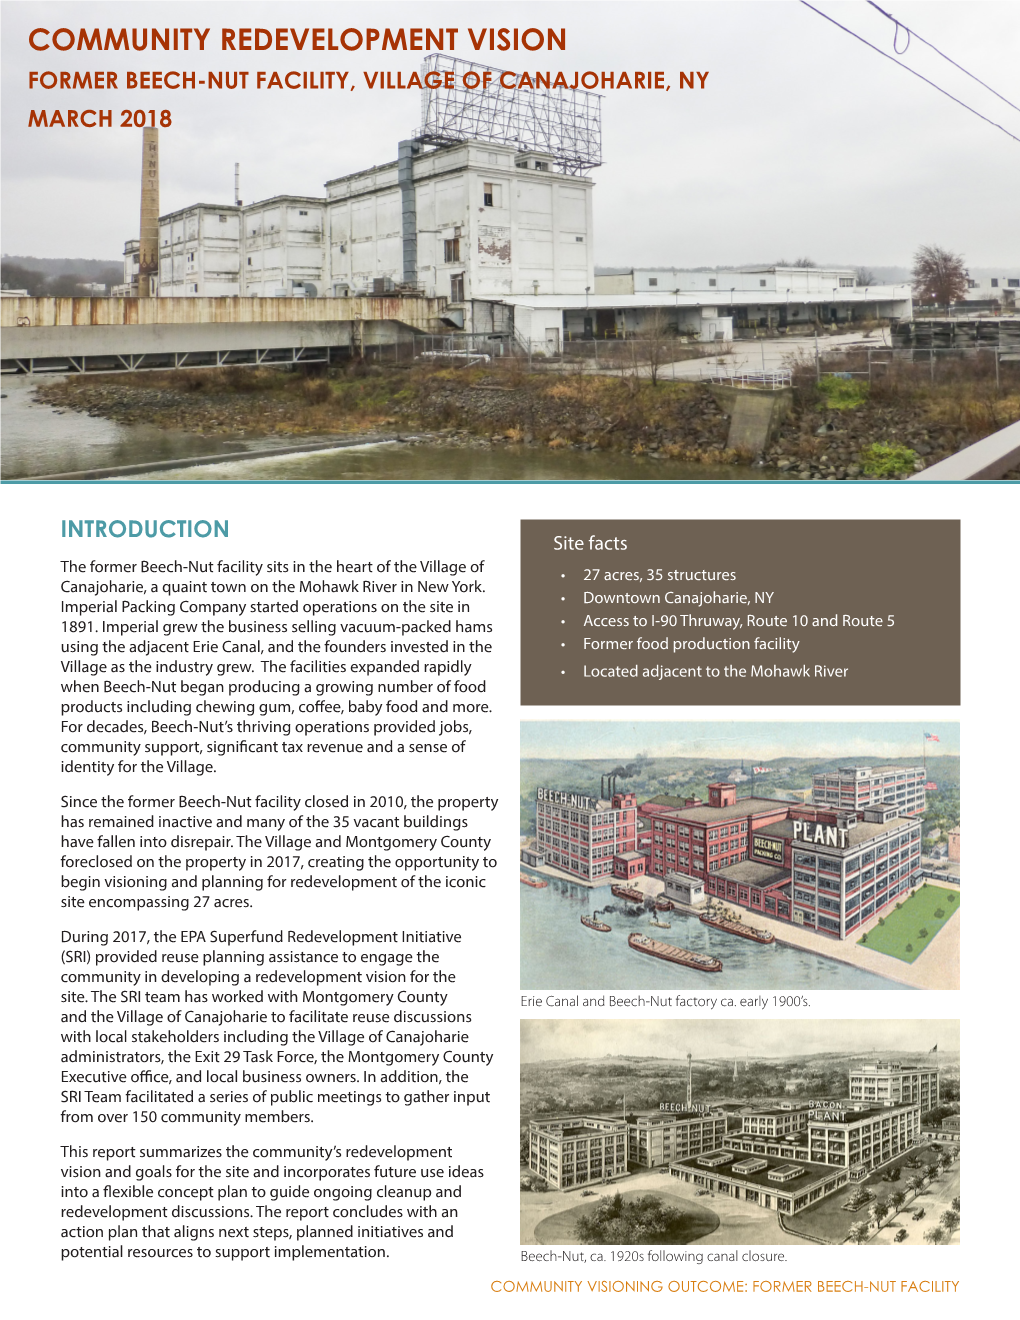 Community Redevelopment Vision Former Beech-Nut Facility, Village of Canajoharie, Ny March 2018